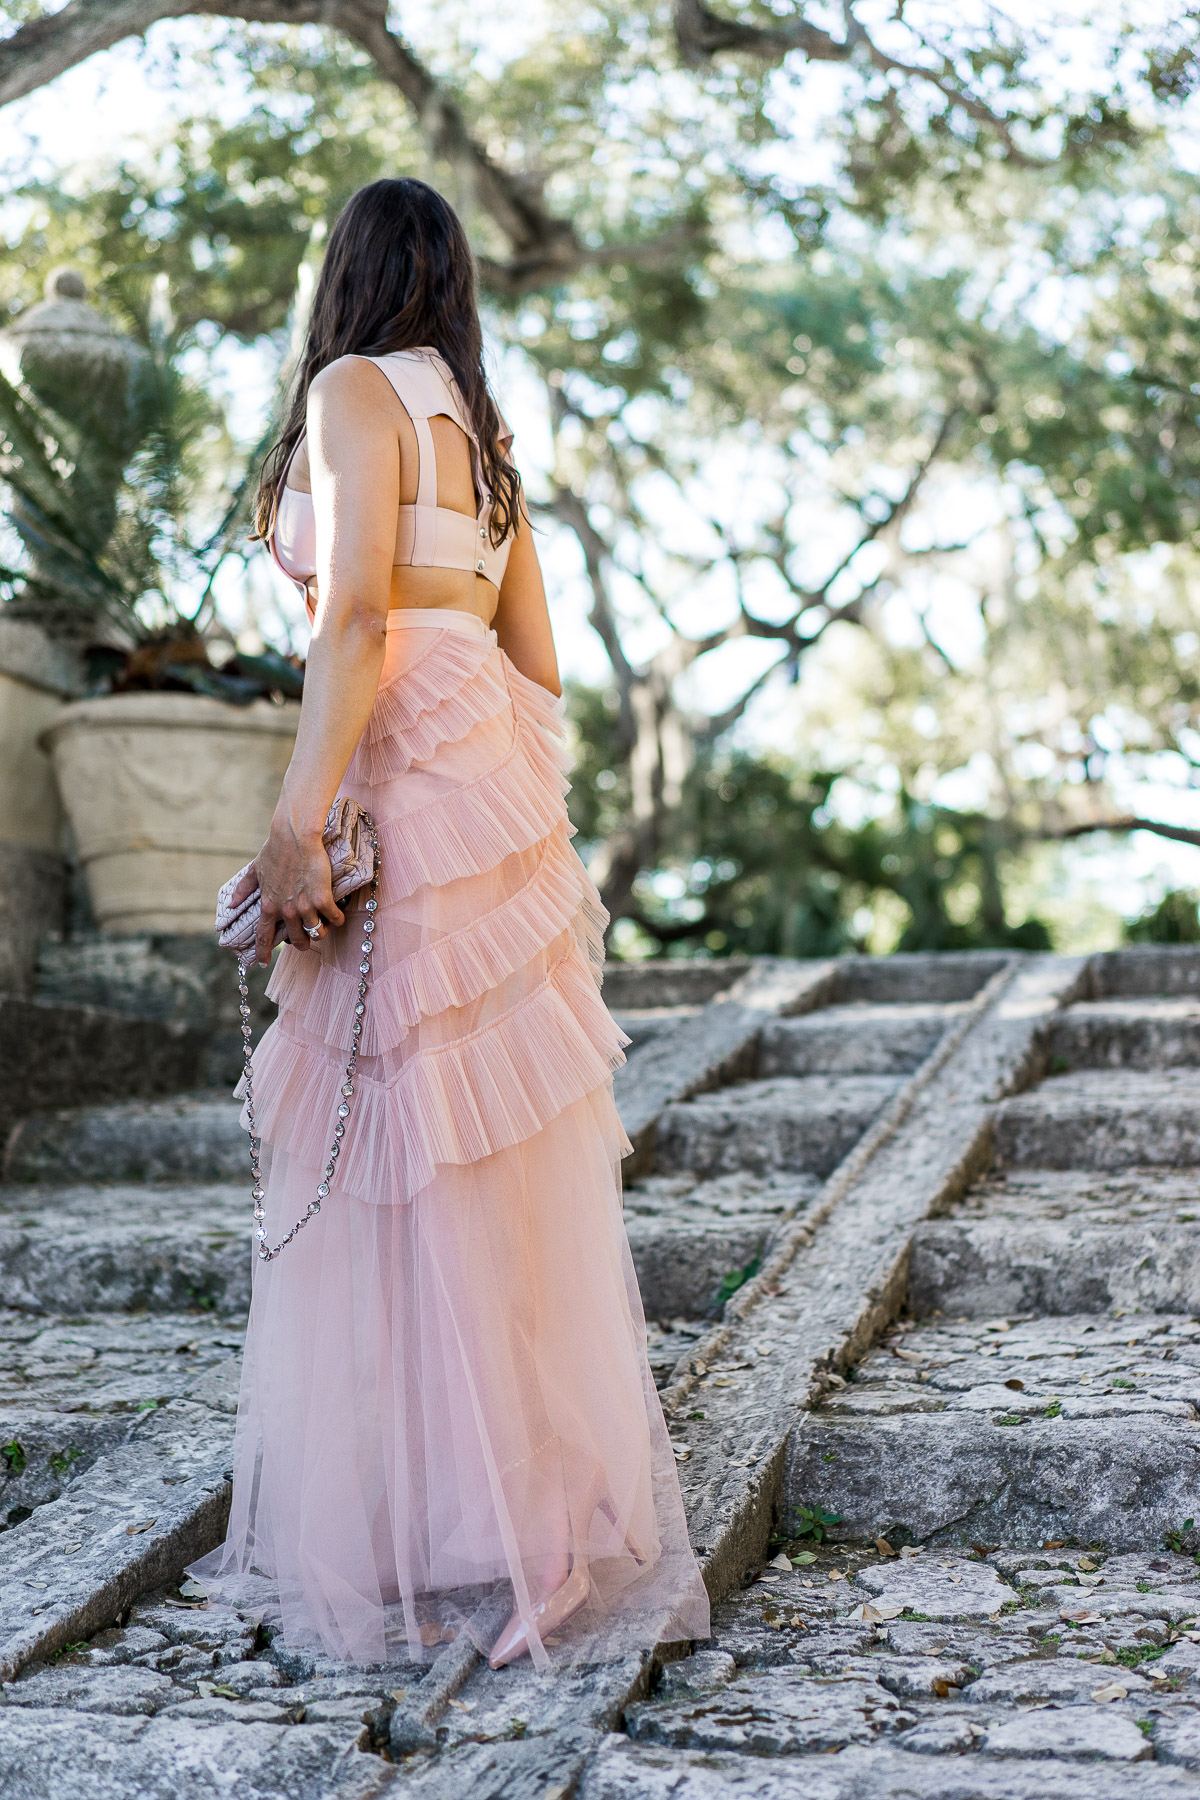 A Glam Lifestyle blogger wears stunning blush tulle dress by BCBG at Viscaya Gardens in Miami with her Miu Miu bag and Louboutin Pigalle pumps